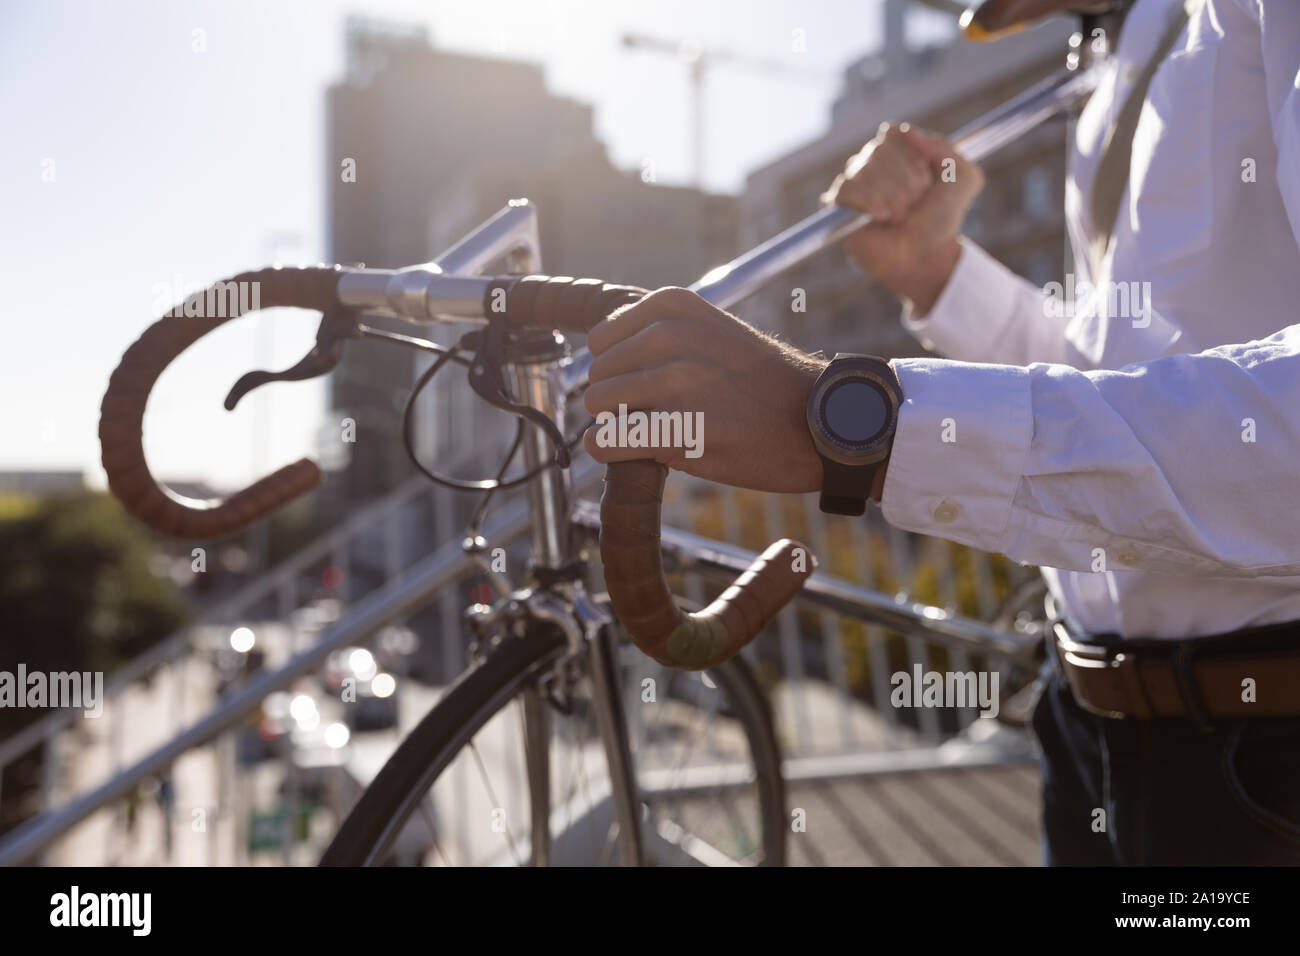 Young professional man carrying a bike Stock Photo